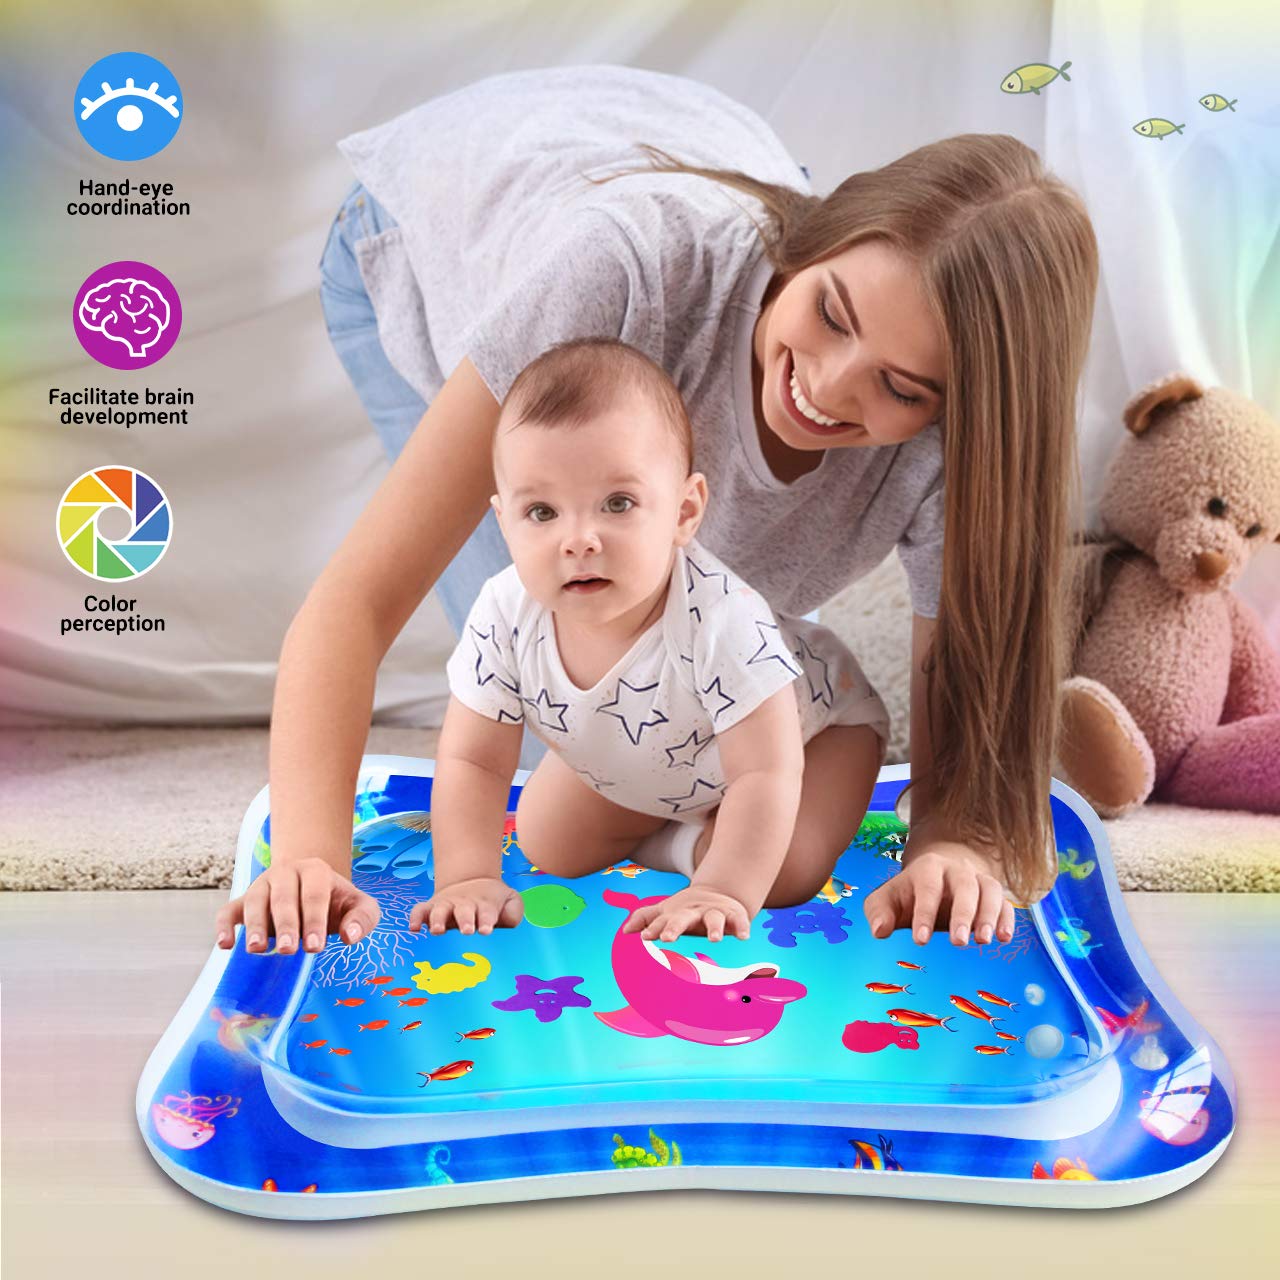 ZMLM Baby Tummy-Time Water Mat - Infant Water Play Mat Water Playmat Sensory Pad Baby Stuff for 3 6 9 12 Months Newborn Toddler Boys Girls Best Gift Fun Indoor Activity Item Game